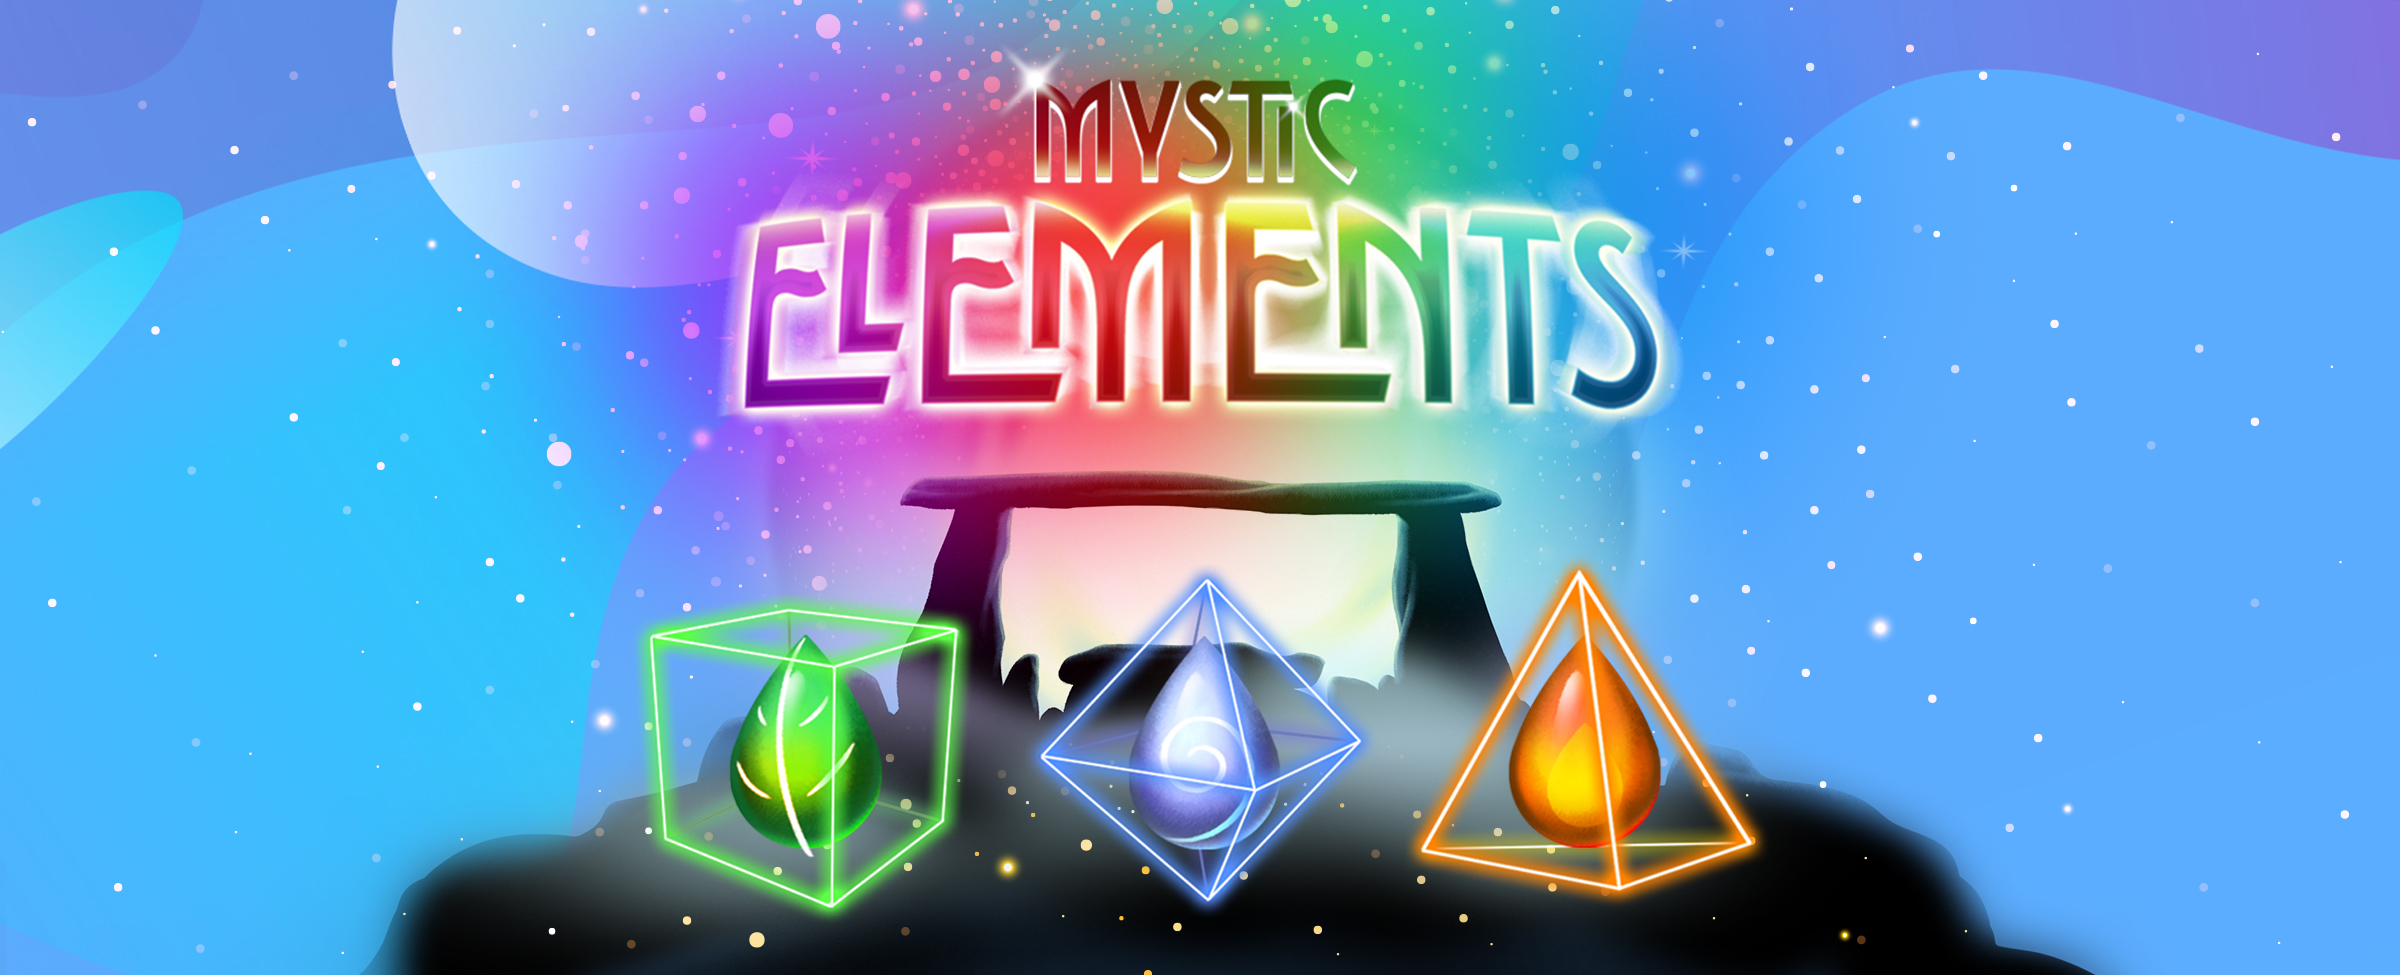 If you love Mythic Wolf, you’ll also love Mystic Elements. Read our snapshot of this game to see if it’s for you.